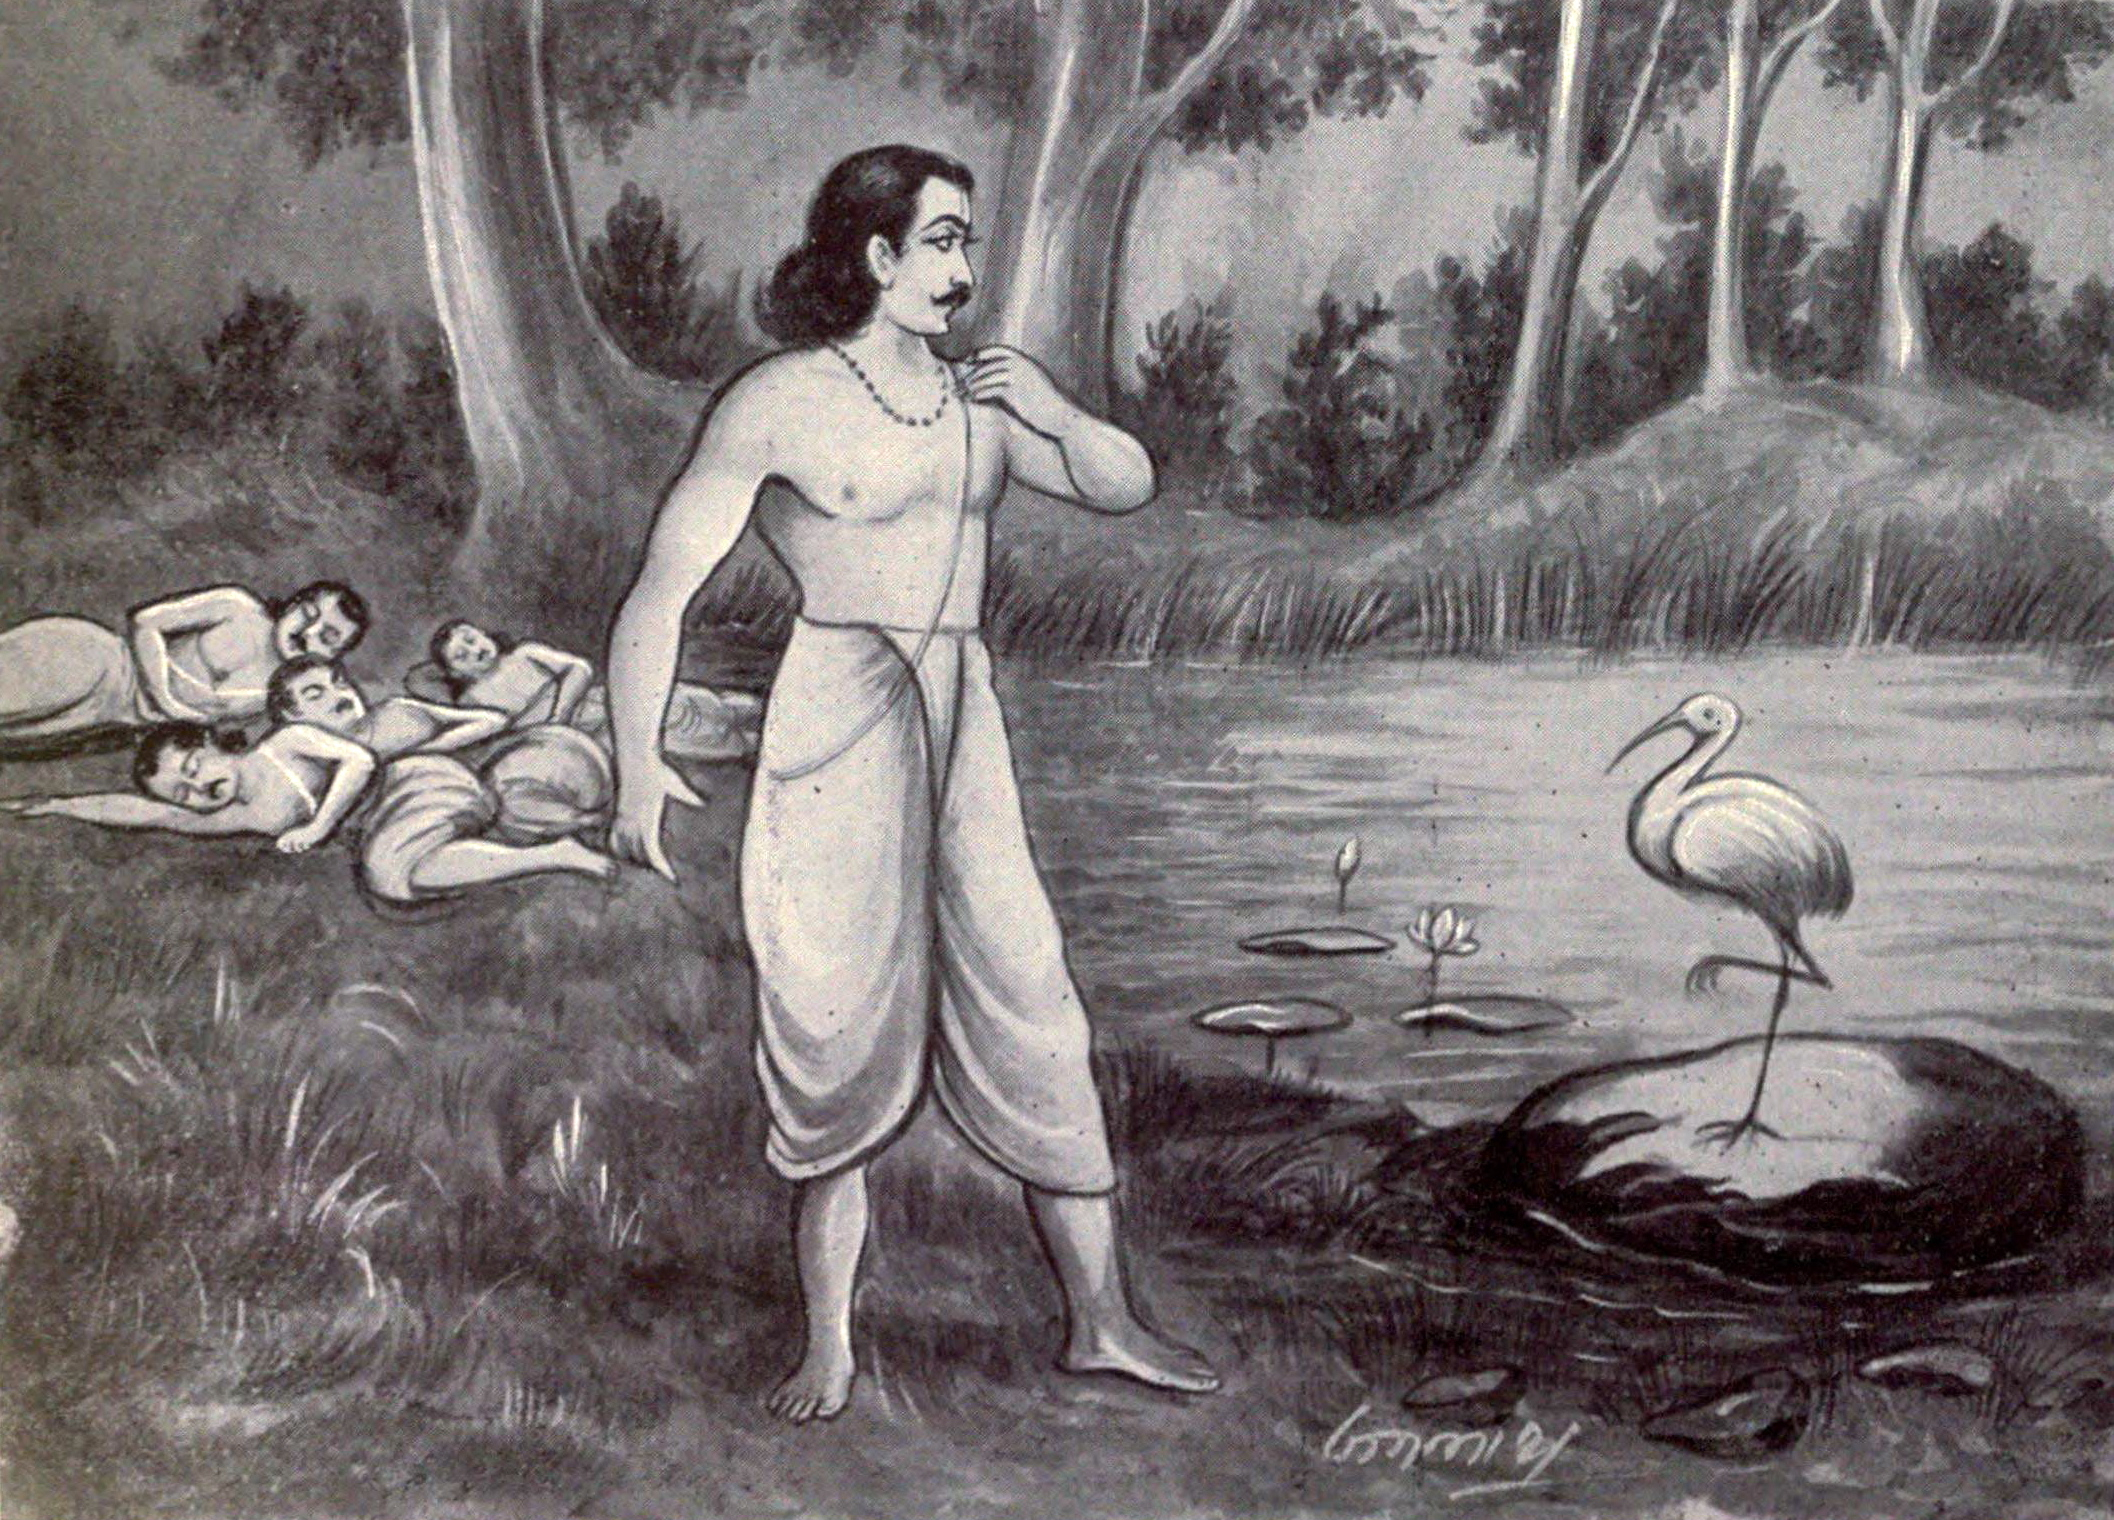 Mahabharata Episode 40: Yudhistir and the Crane - The Stories of ...